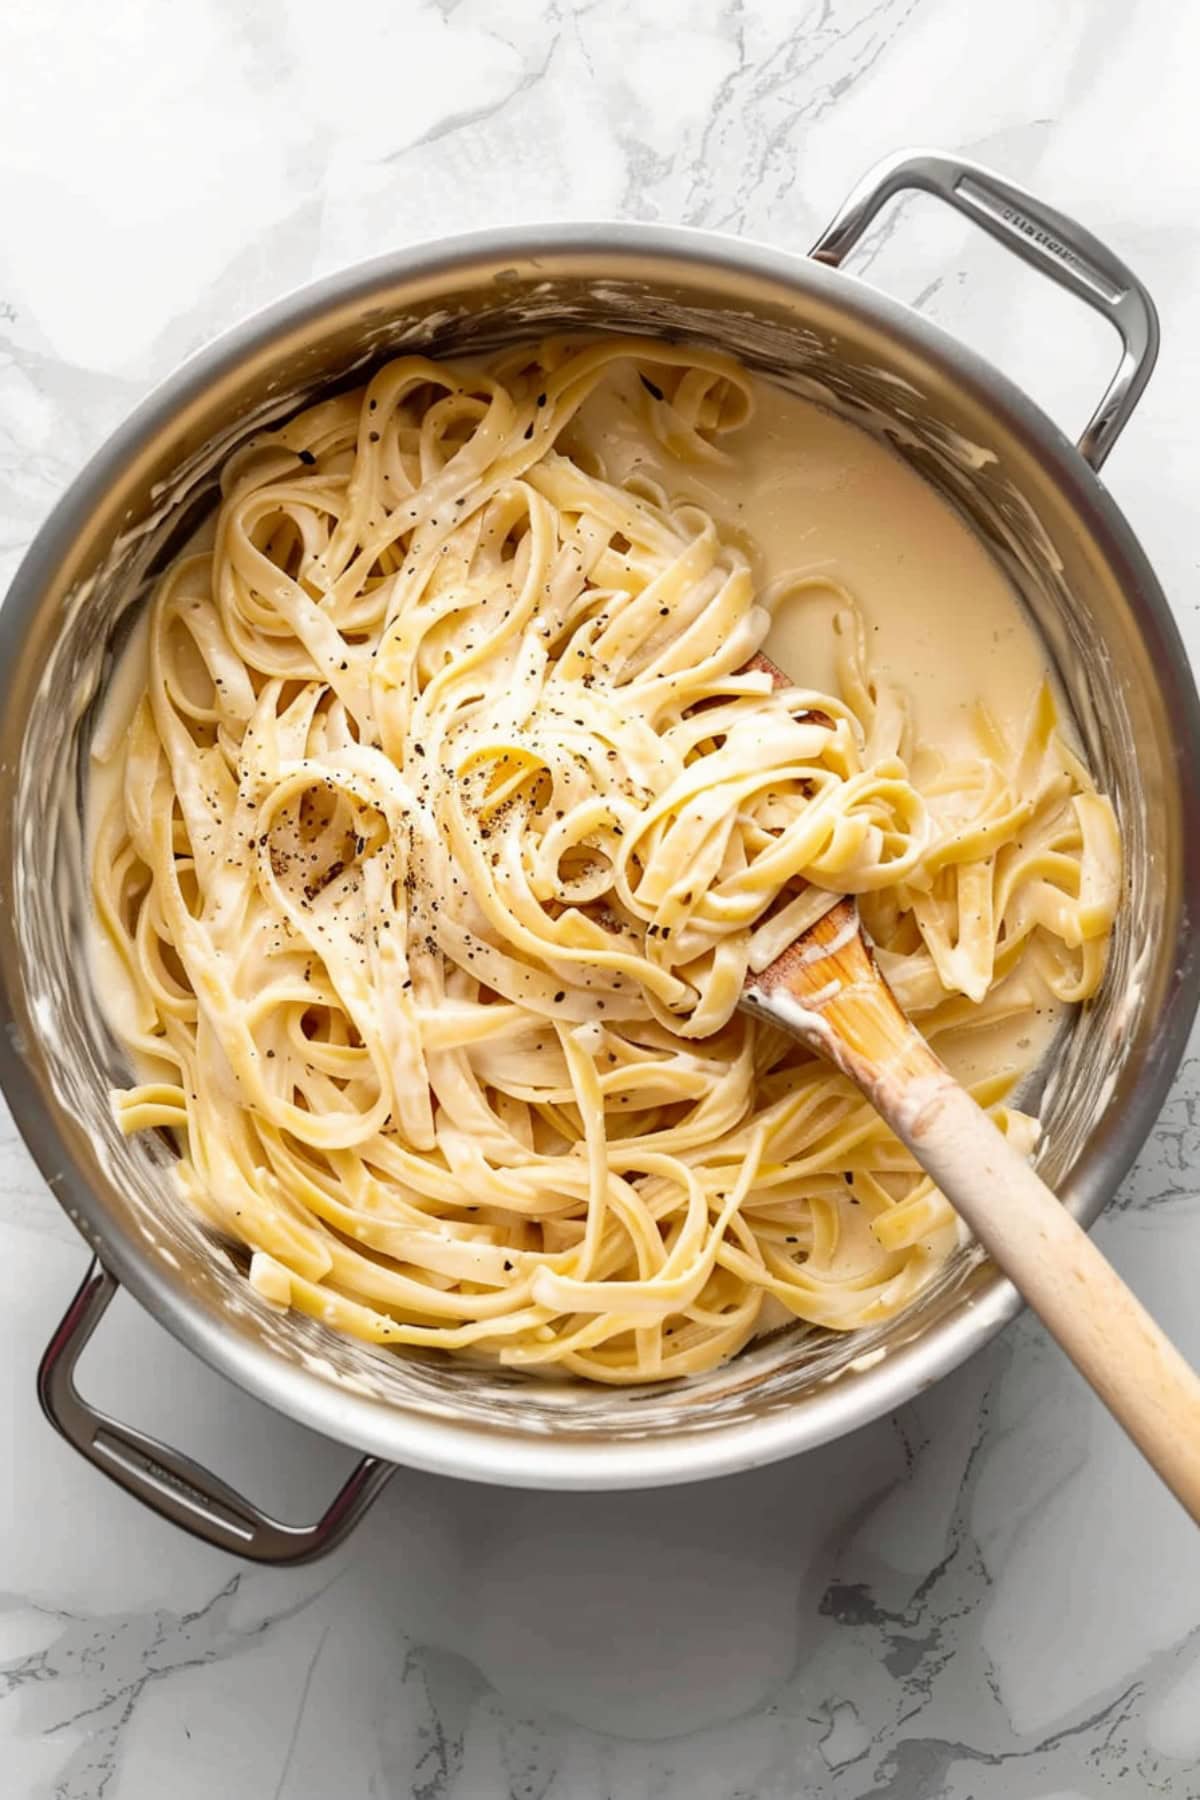 A large pot of creamy fettucine pasta on a white marble countertop.